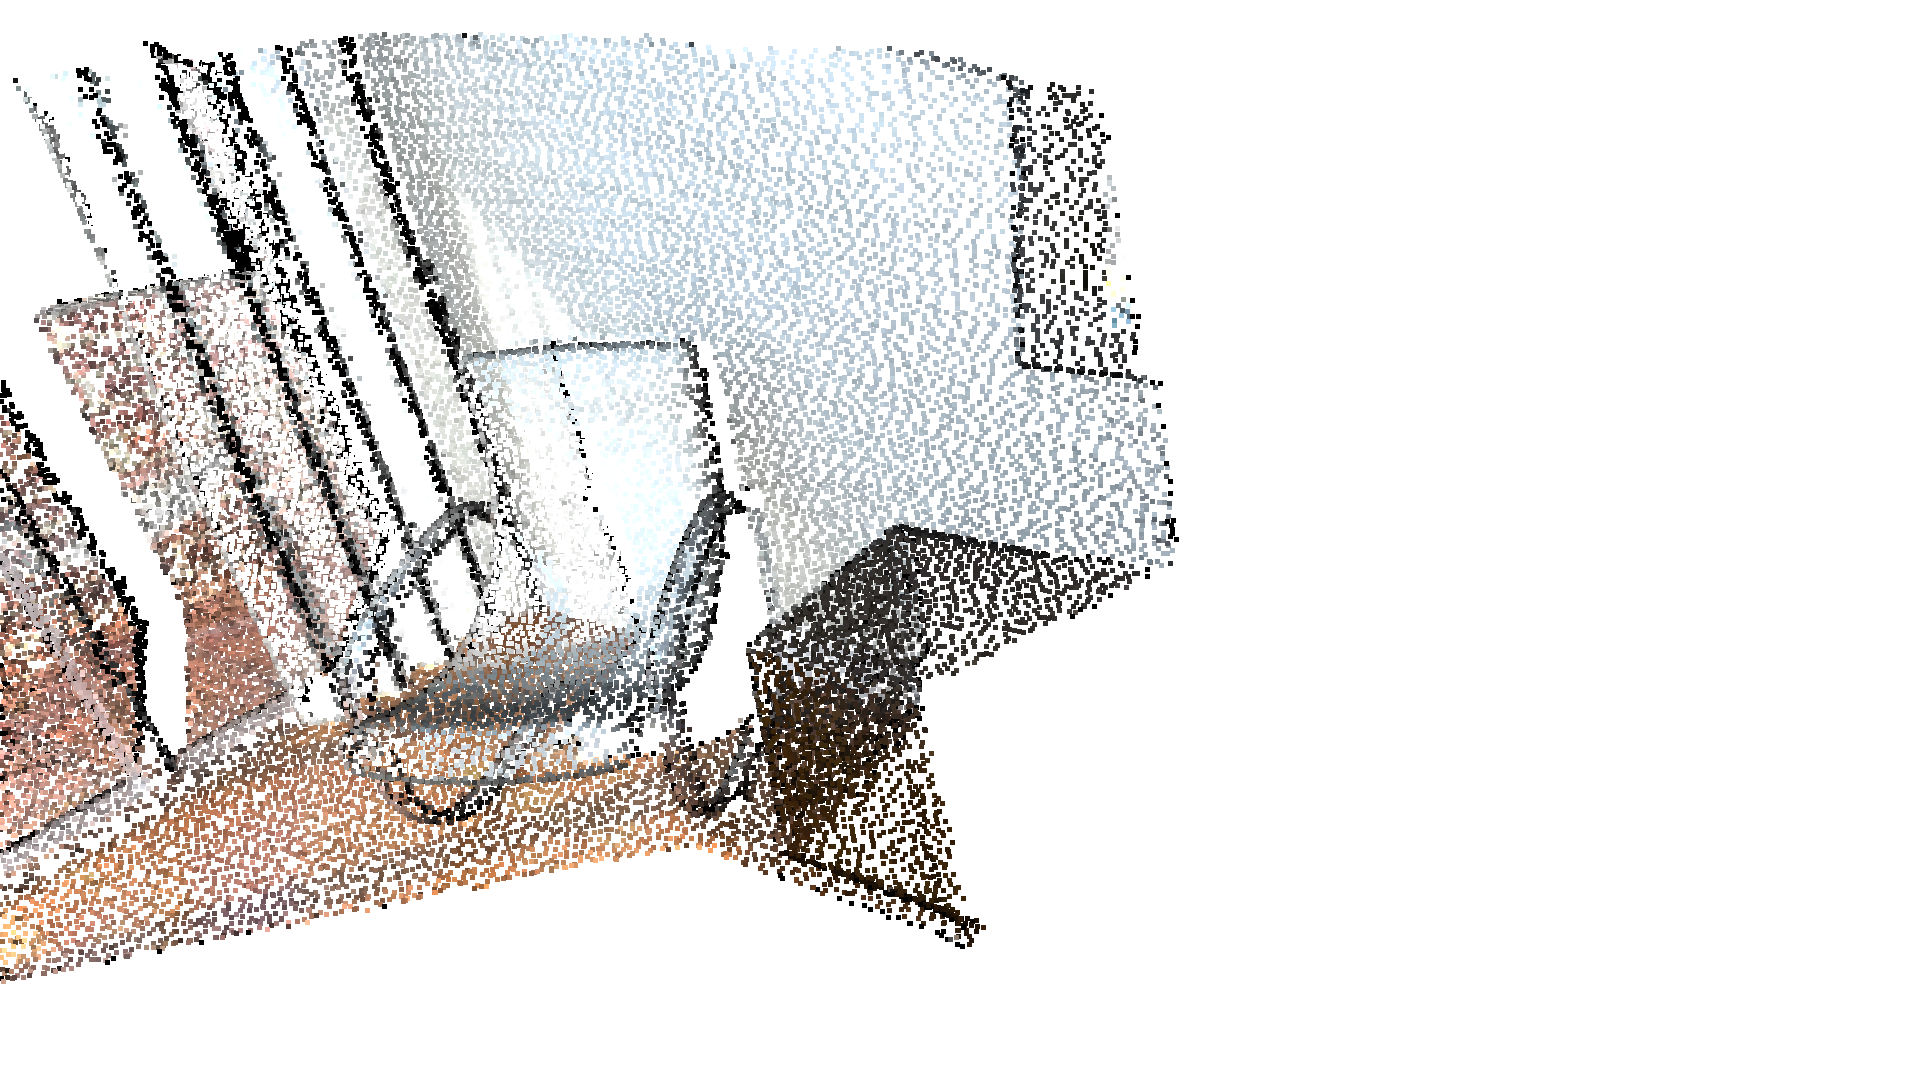 ../../_images/tutorial_Advanced_pointcloud_outlier_removal_5_1.png